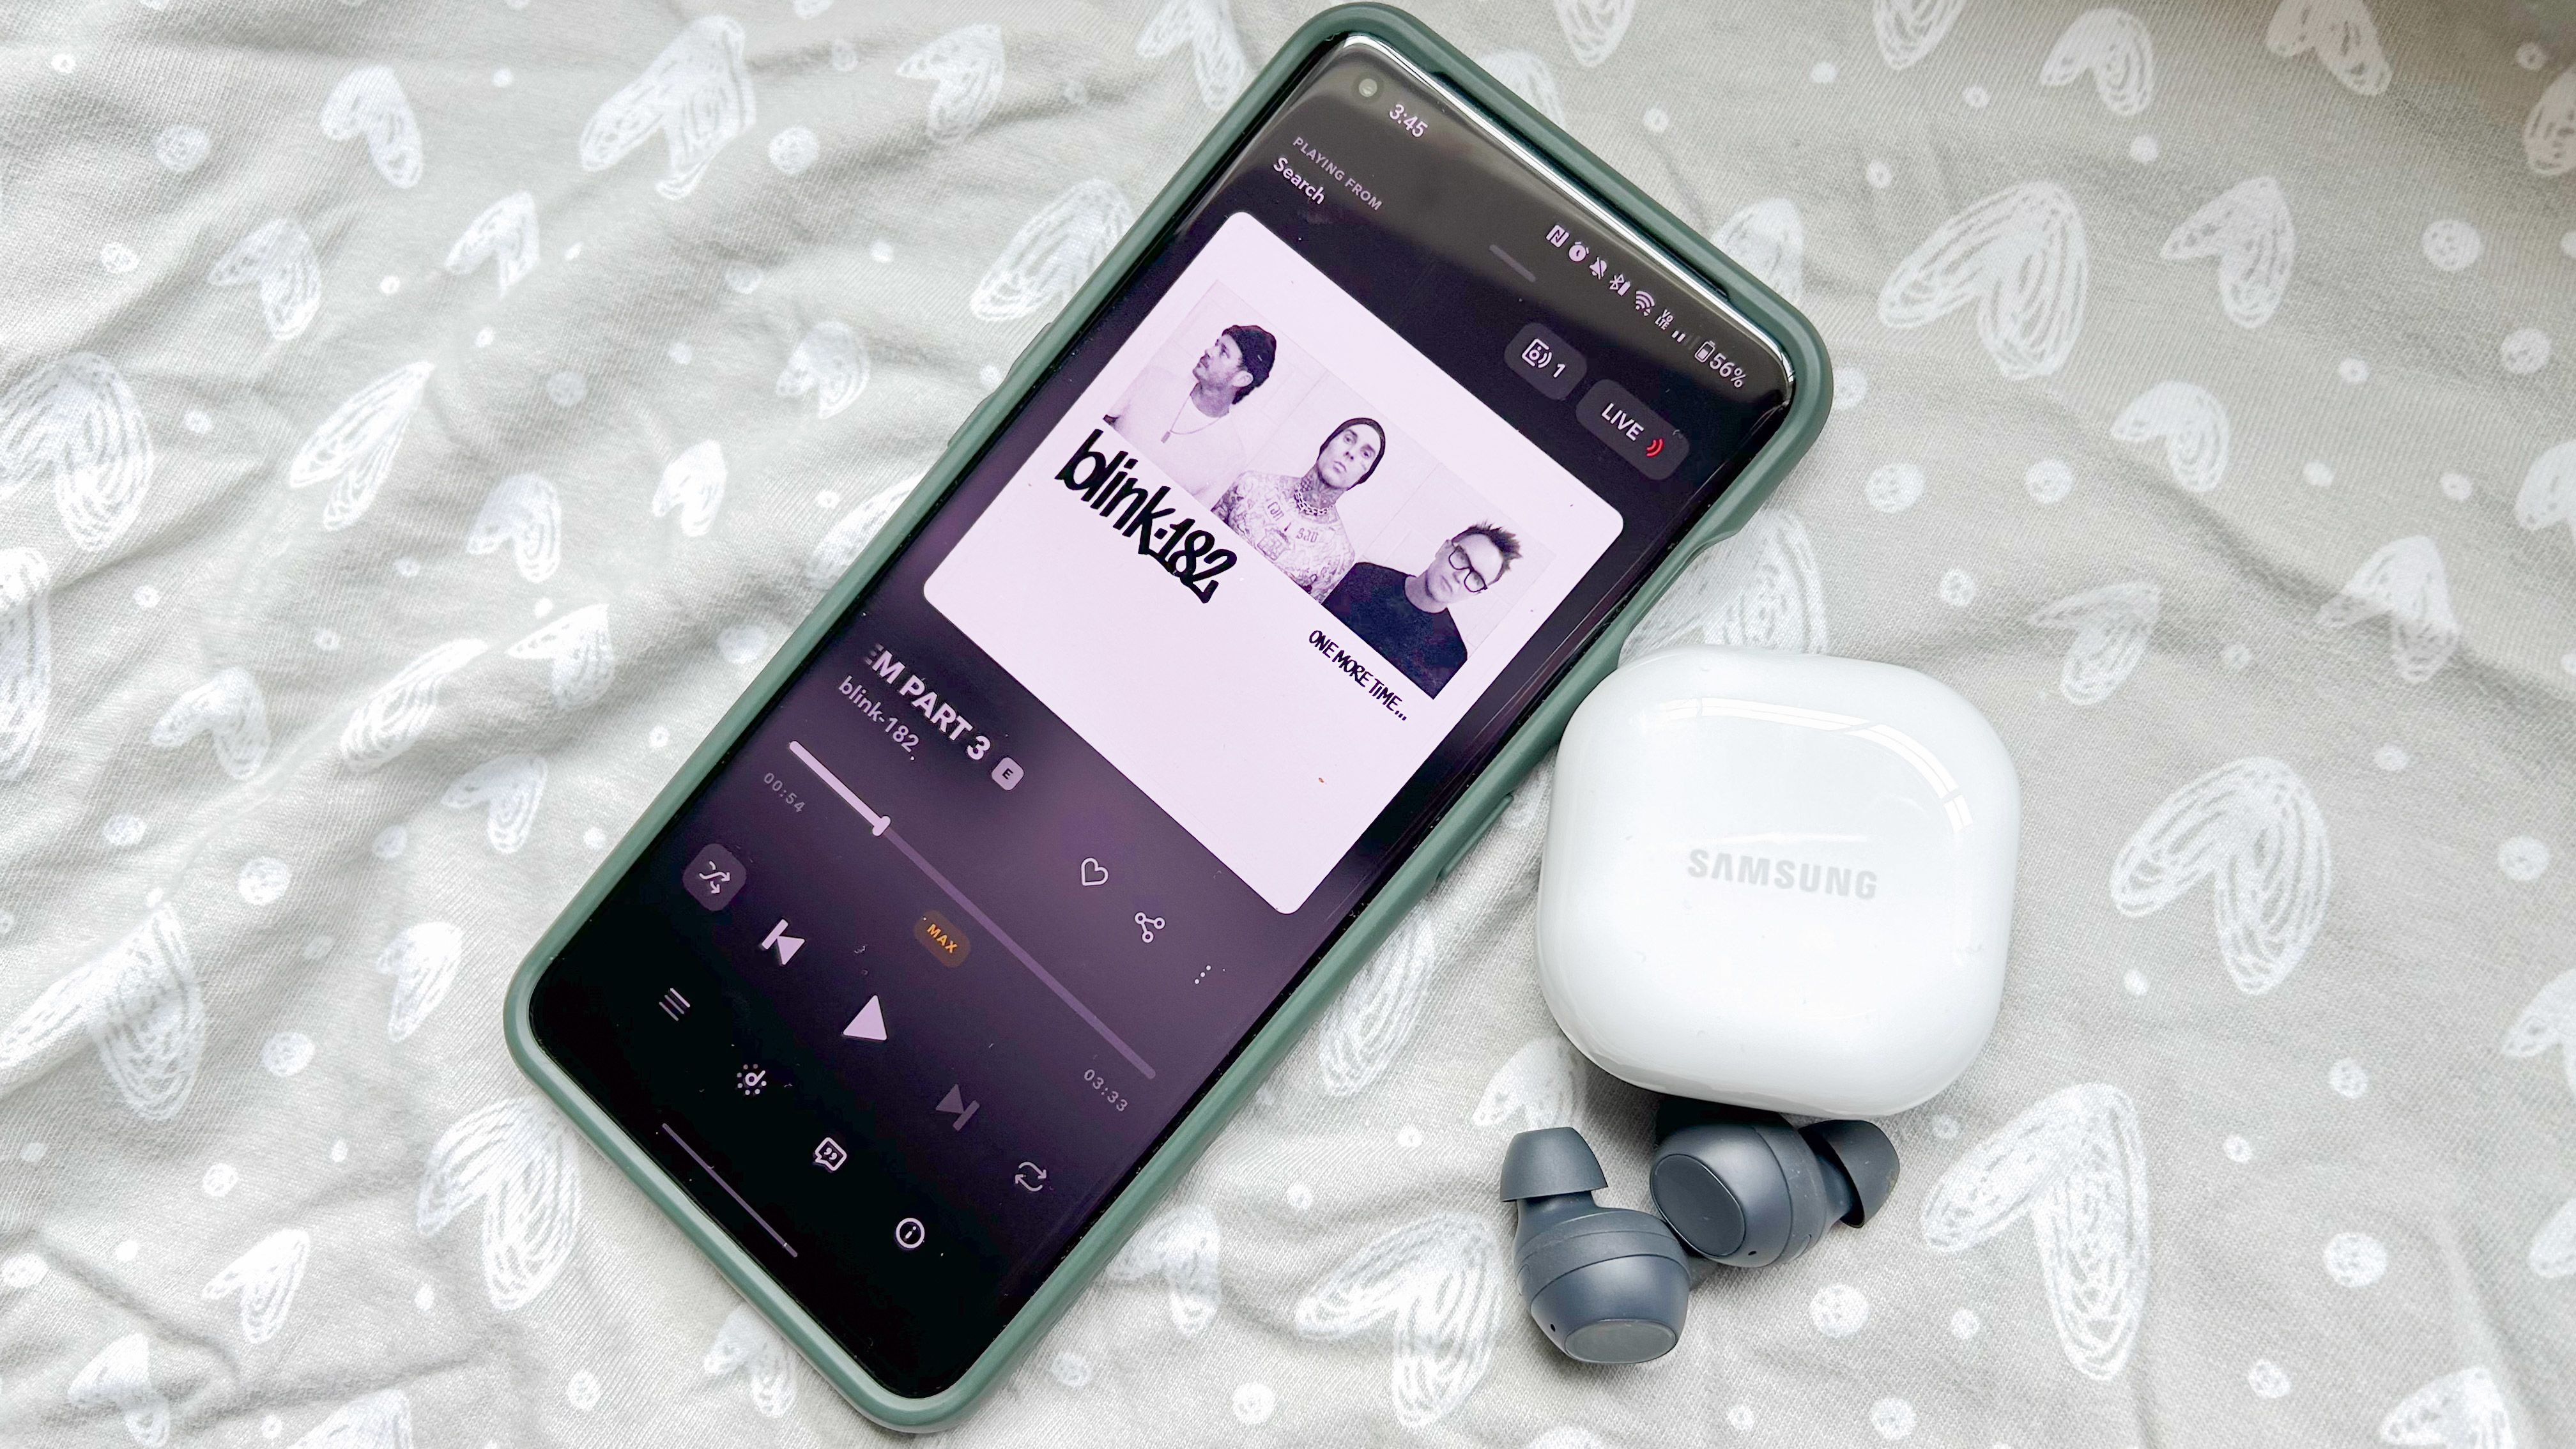 Samsung has launched the Galaxy Buds FE with ANC at $99